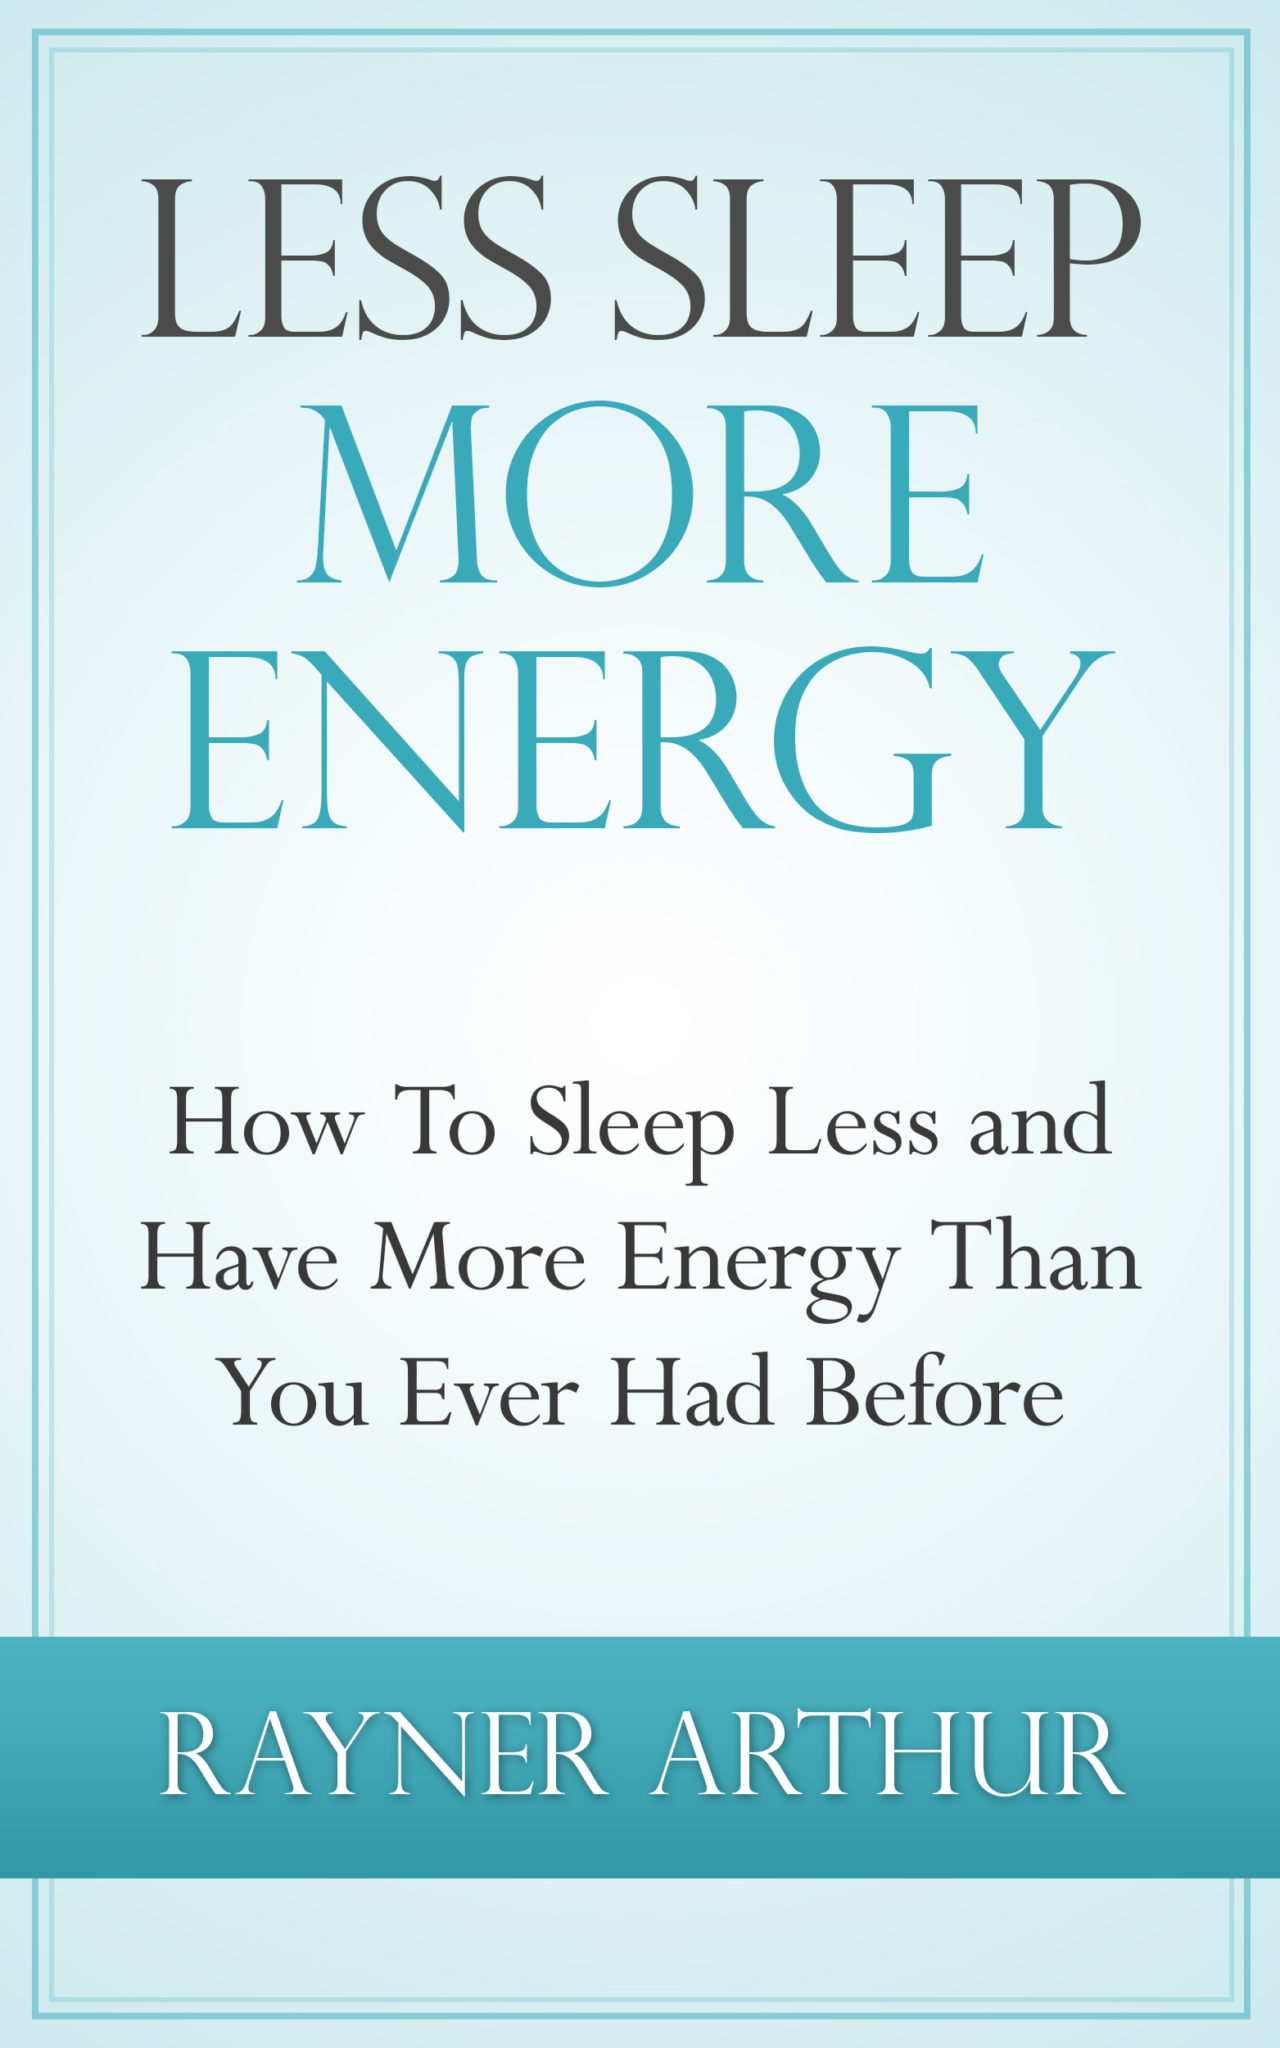 FREE: LESS SLEEP MORE ENERGY: How To Sleep Less And Have More Energy Than You Ever Had Before by Arthur Rayner